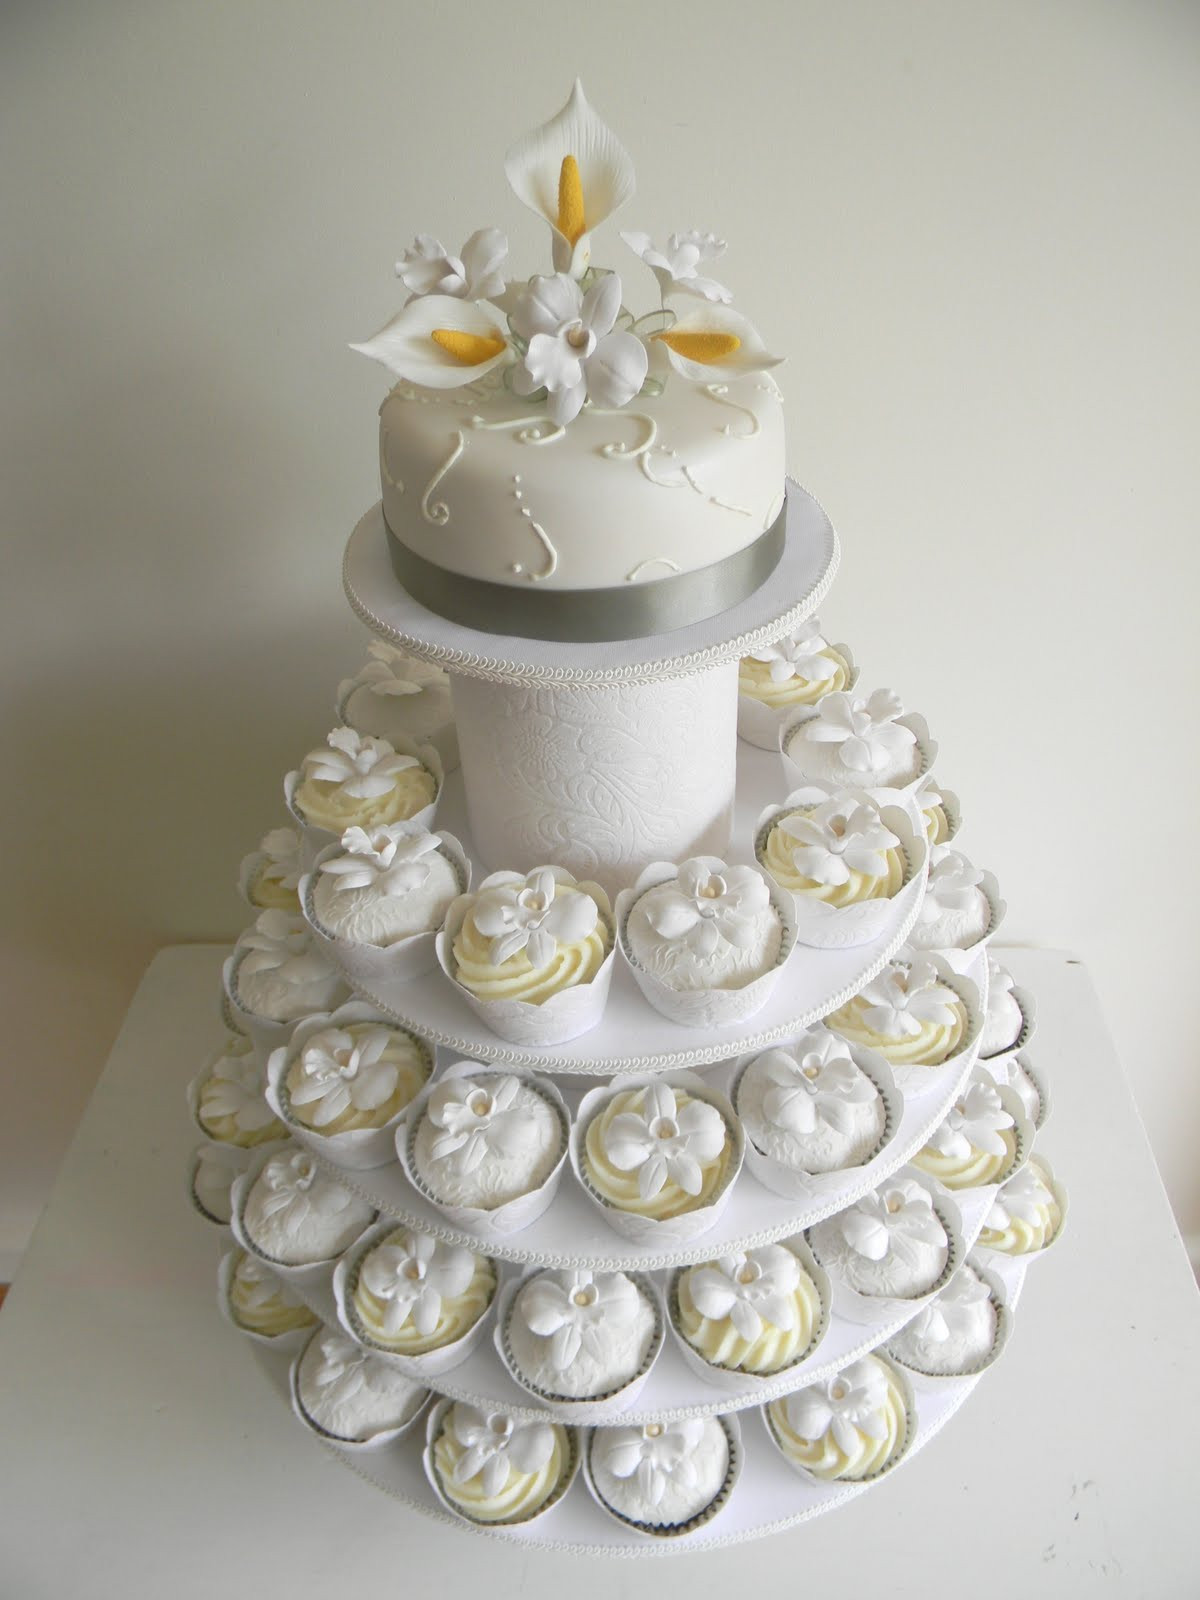 Wedding Cakes And Cup Cakes
 Cupcake Wedding Cakes